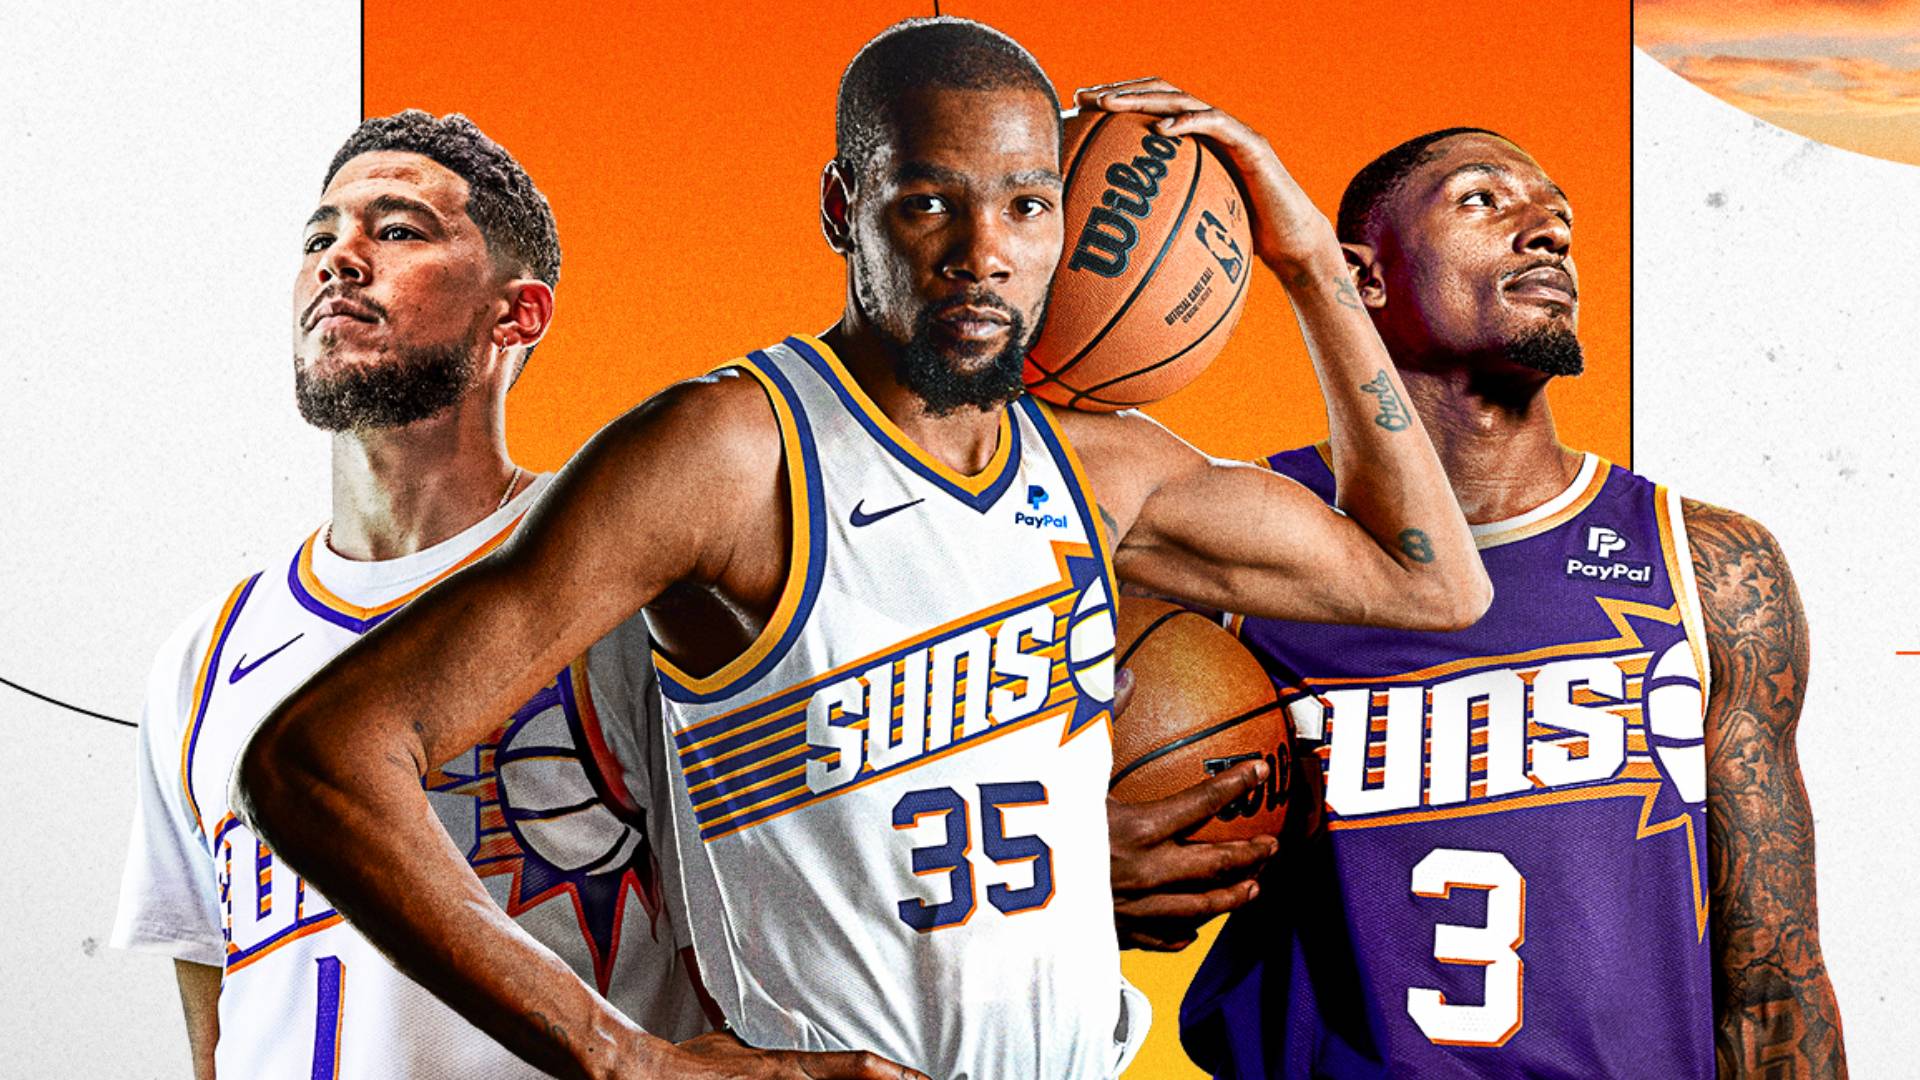 Valley of the Suns: A Phoenix Suns Podcast on Apple Podcasts